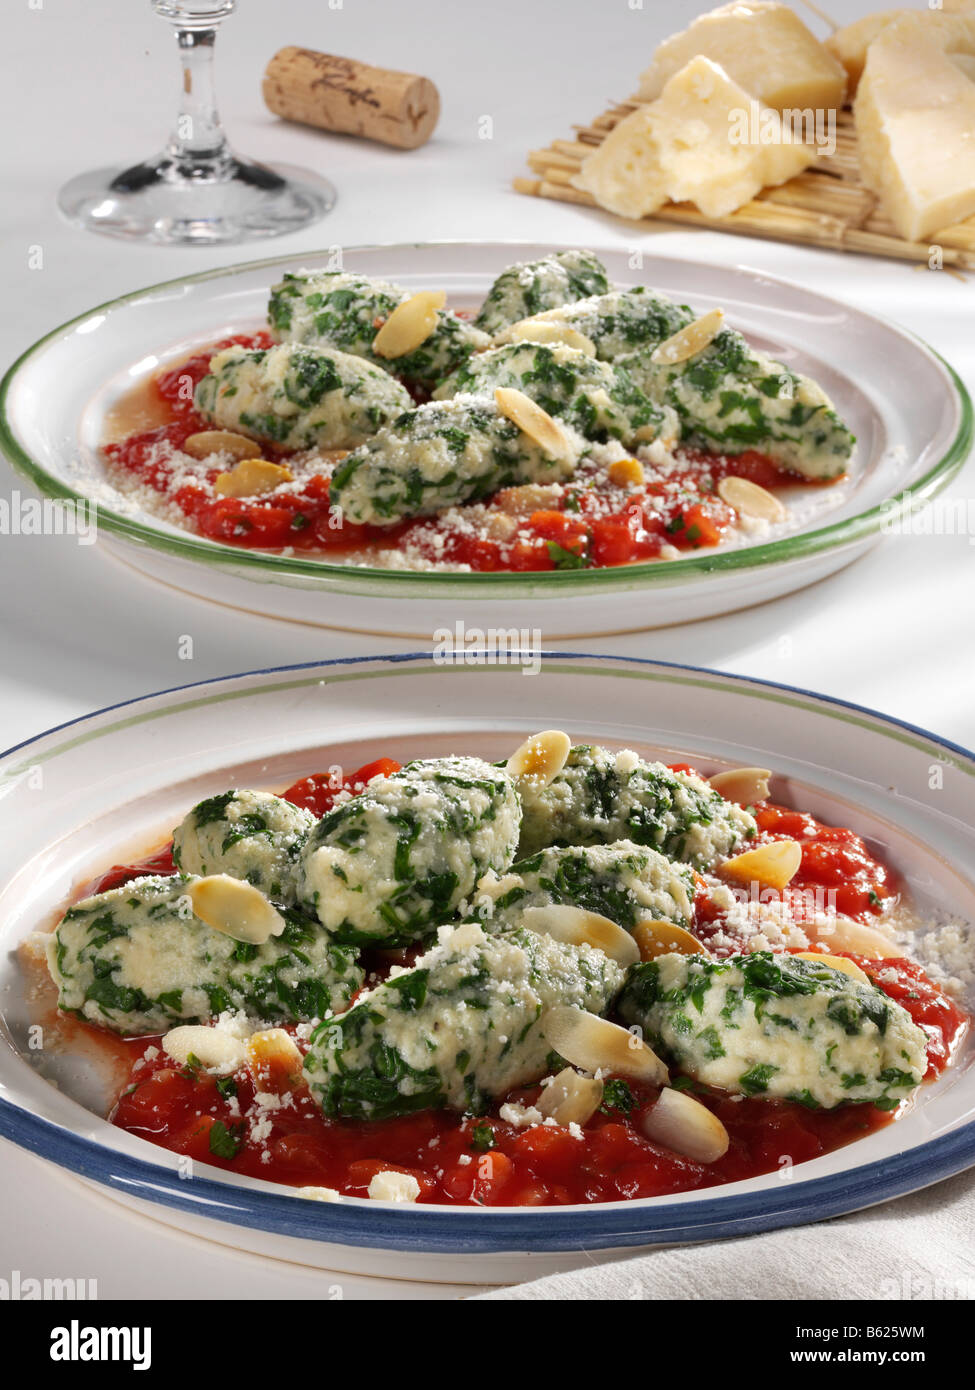 Spinach Gnocche with tomato sauce on plates Stock Photo